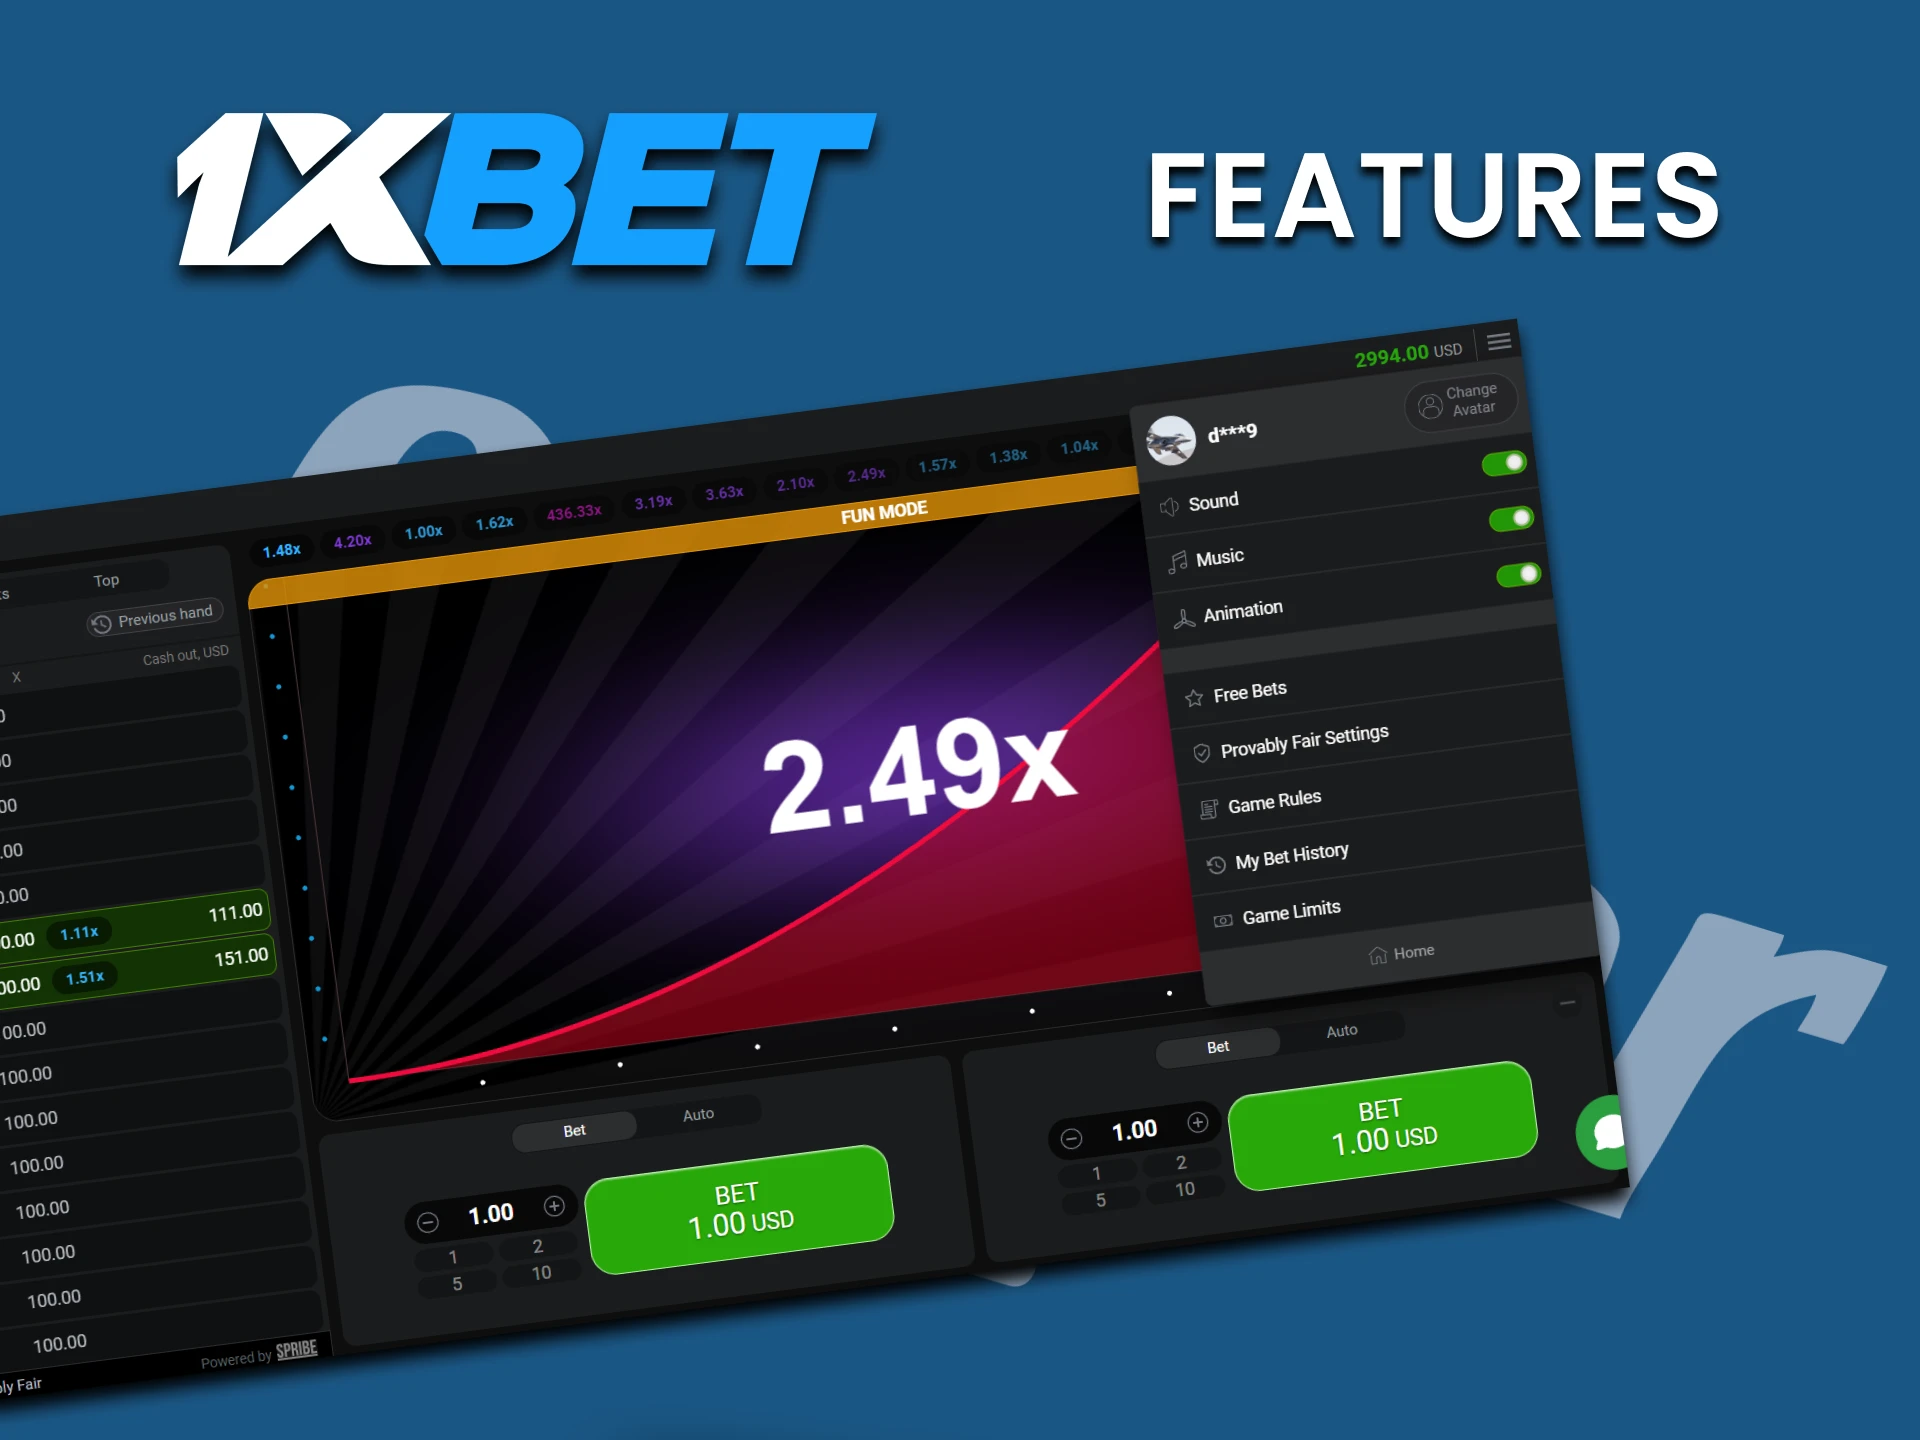 We will tell you about the possibilities of playing Aviator on 1xbet.